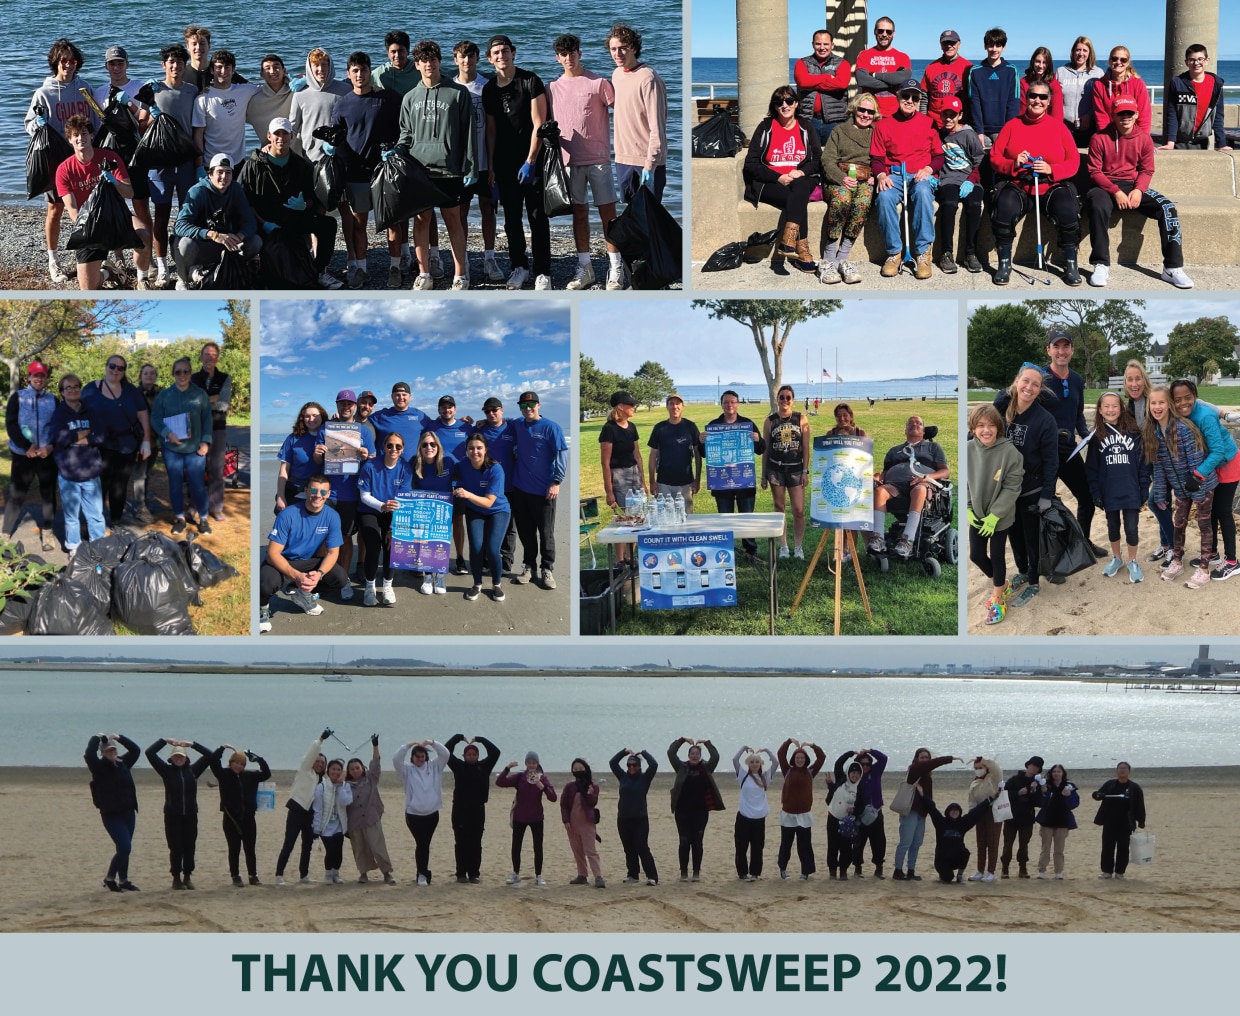 2022 COASTSWEEP Beach Cleanup - Thank you collage of volunteers